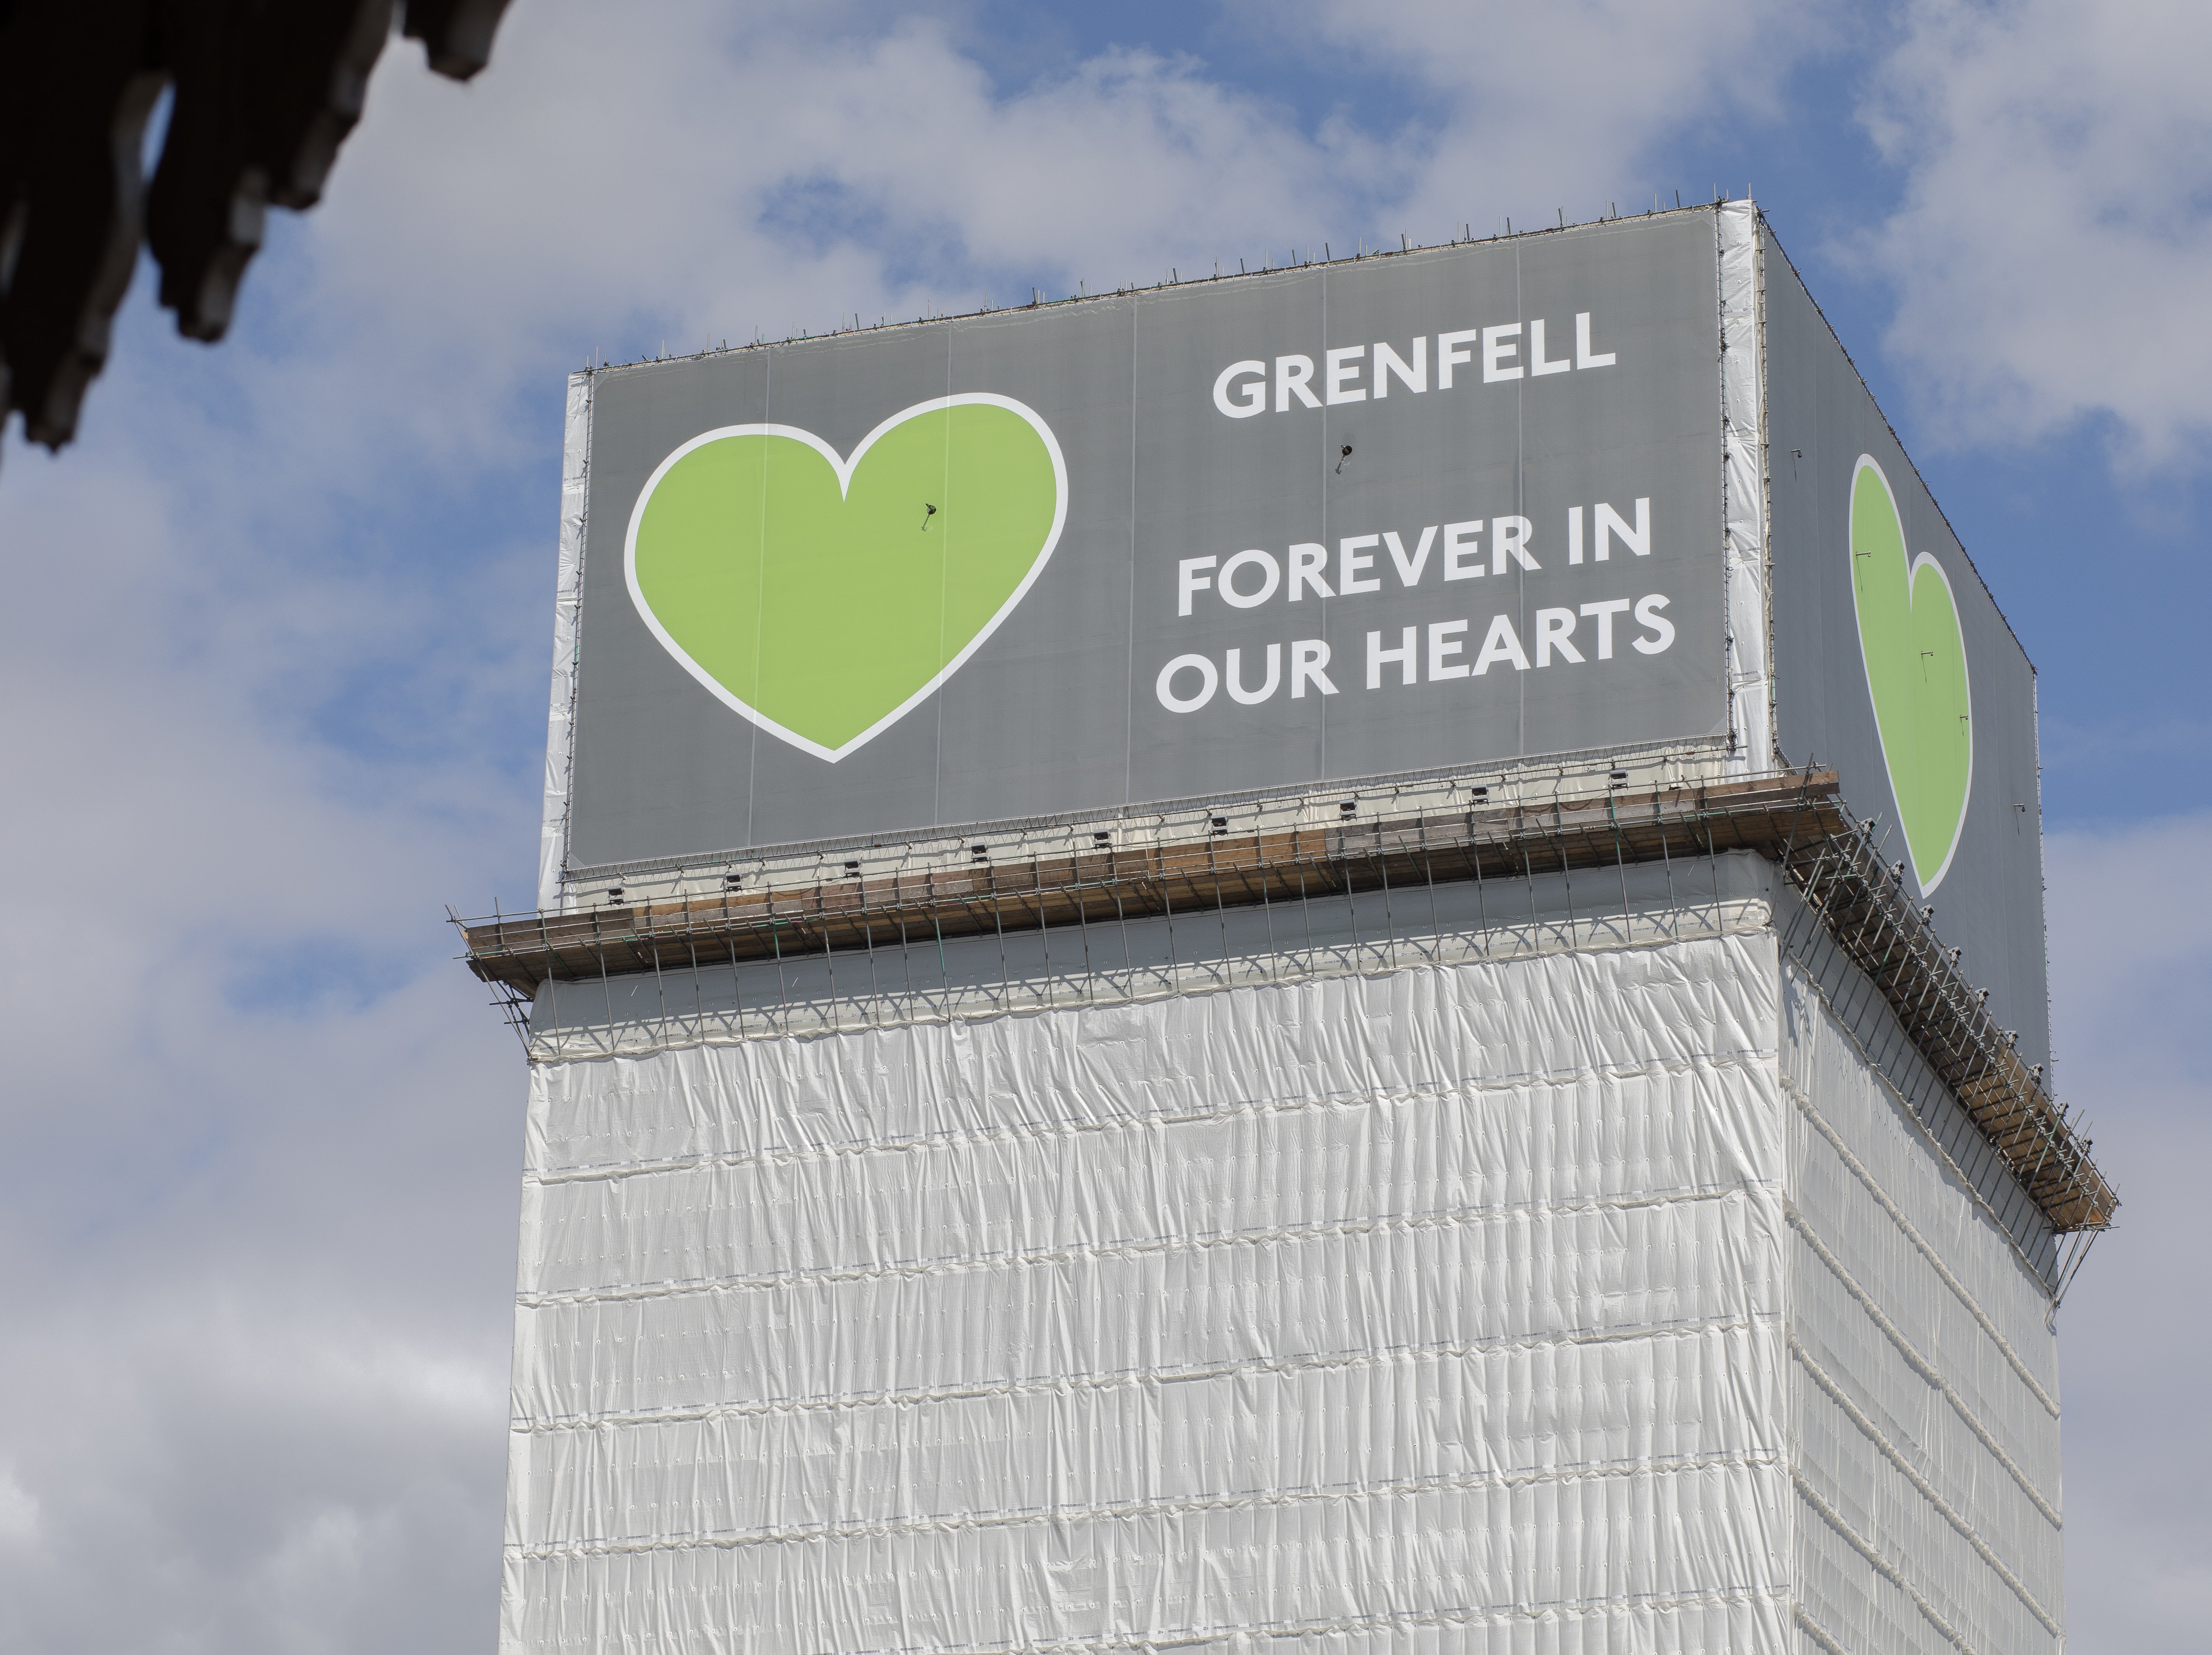 The Grenfell inquiry has previously heard how Kingspan hired a PR firm to lobby MPs following the deadly fire in 2017